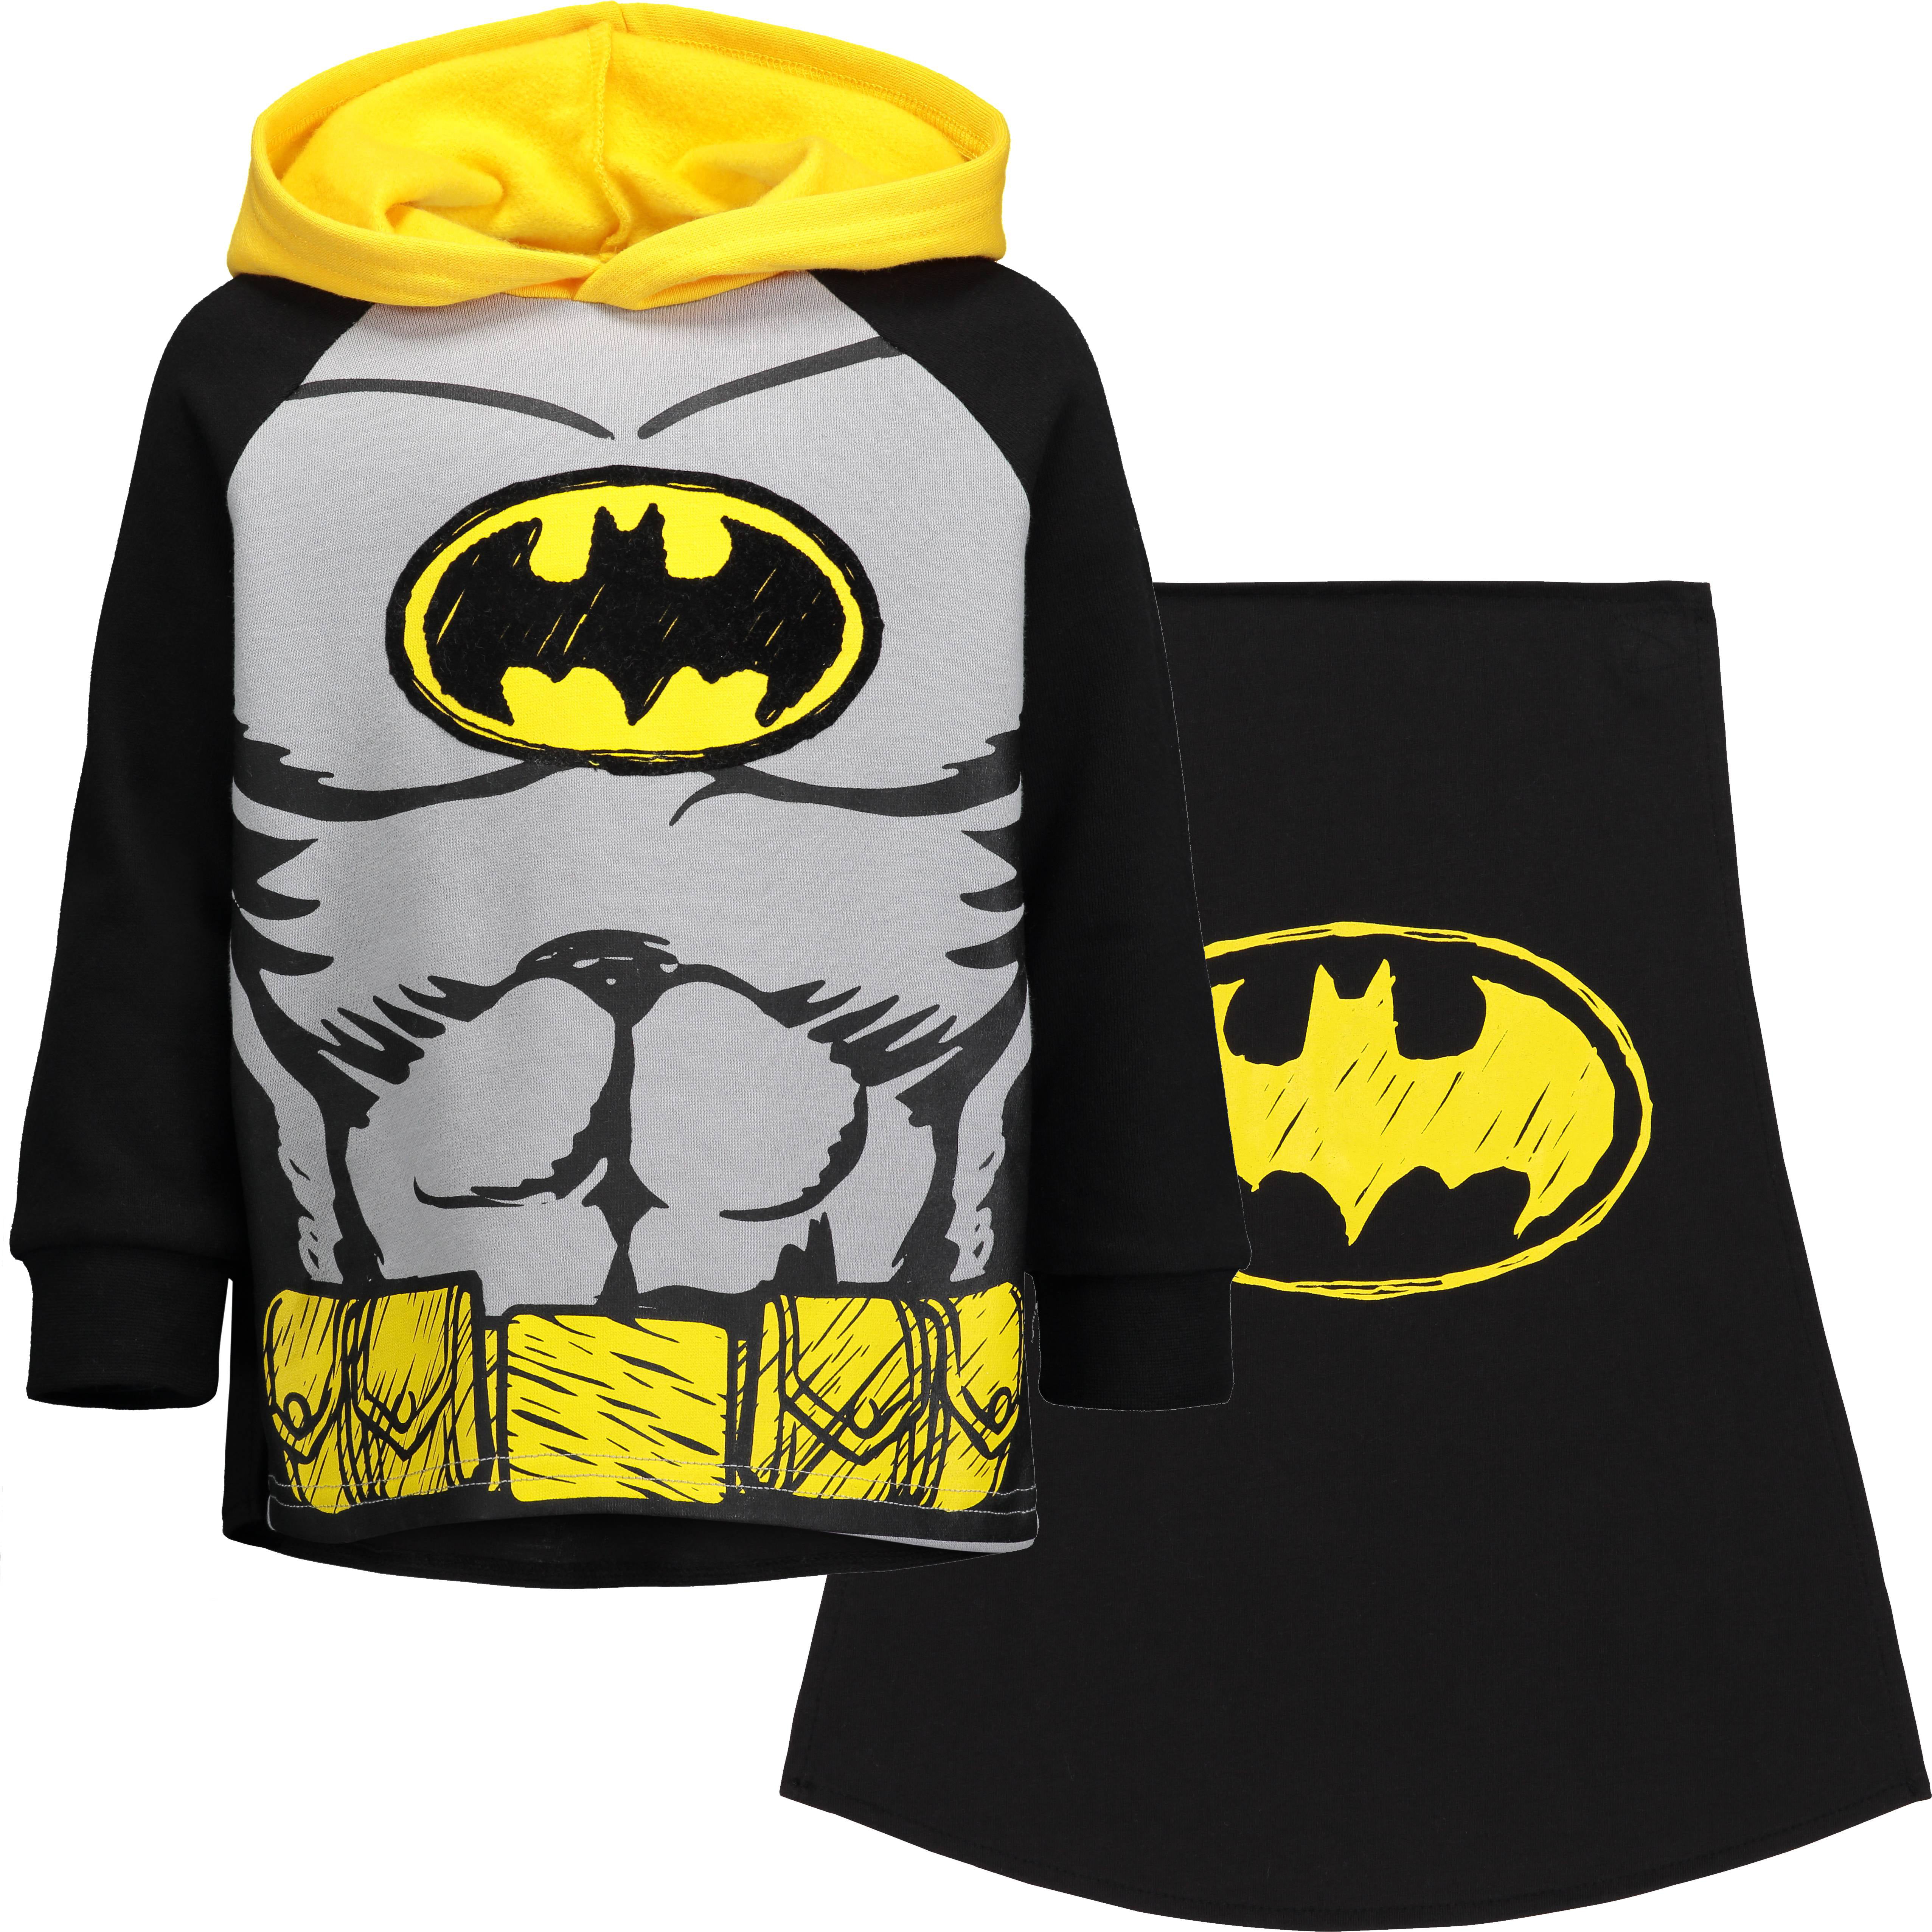 Kids Cartoon Heroes Capes Role Playing Batman Costumes and Masks Birthday Party Gifts 